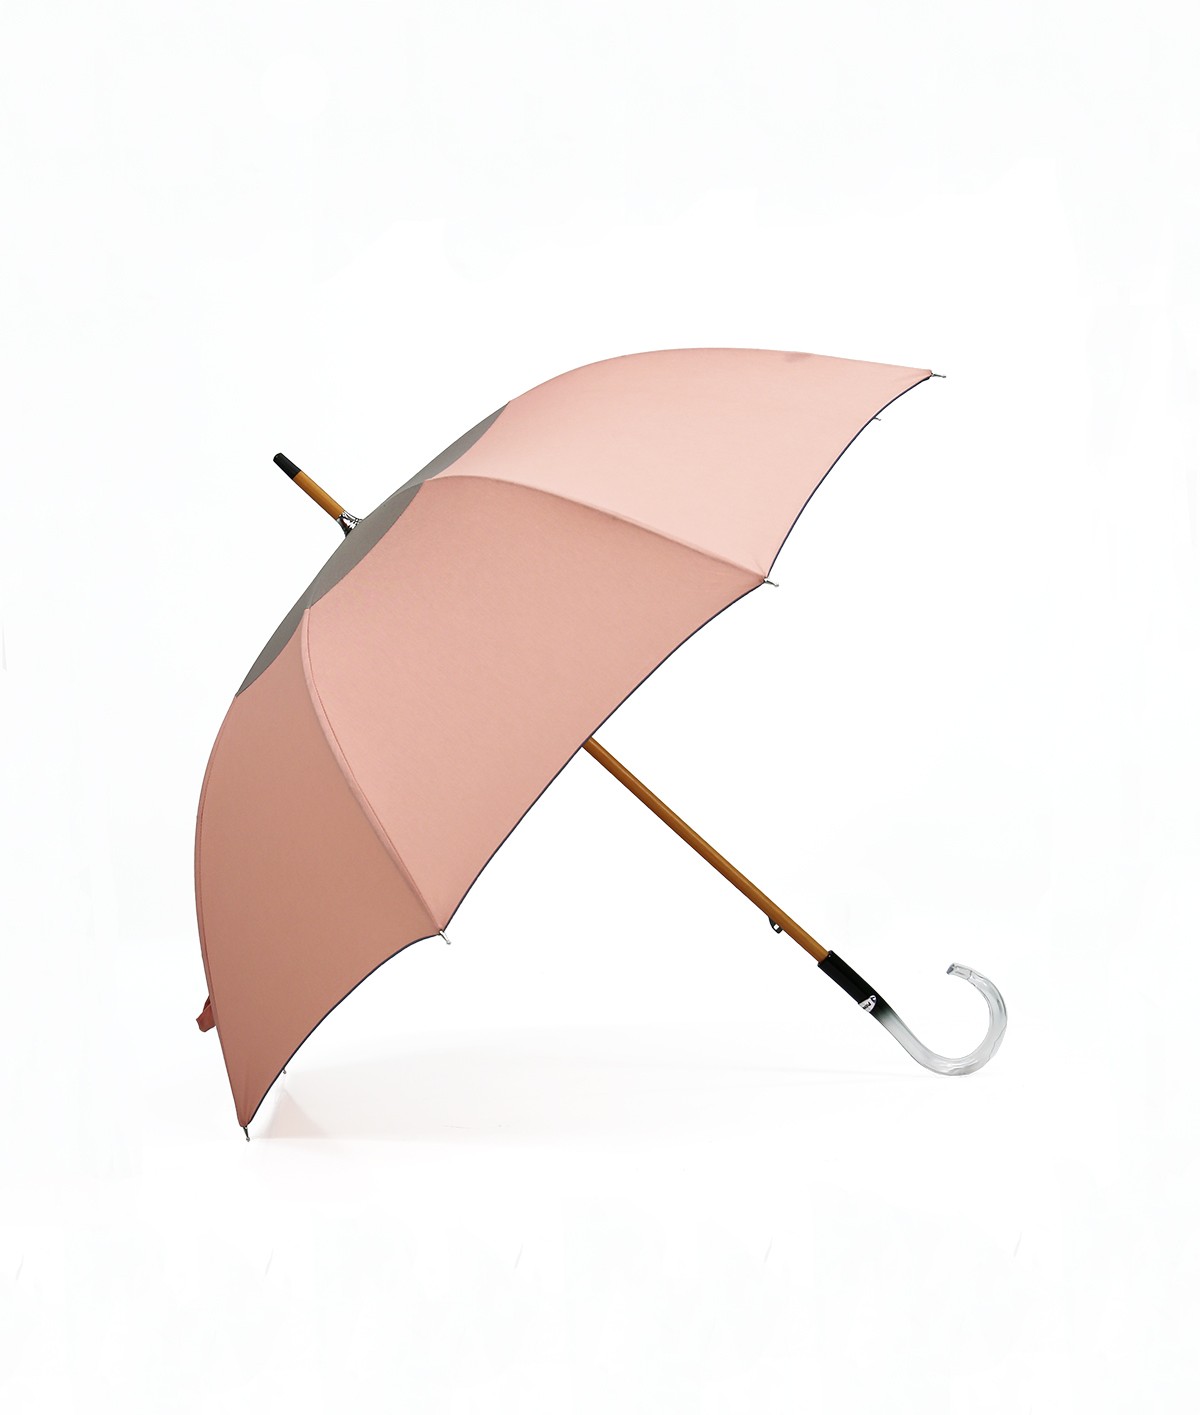 → Umbrella-Parasol - "The Tow Tones" - Hawthorn pink and Mastic - Long manual by Maison Pierre Vaux